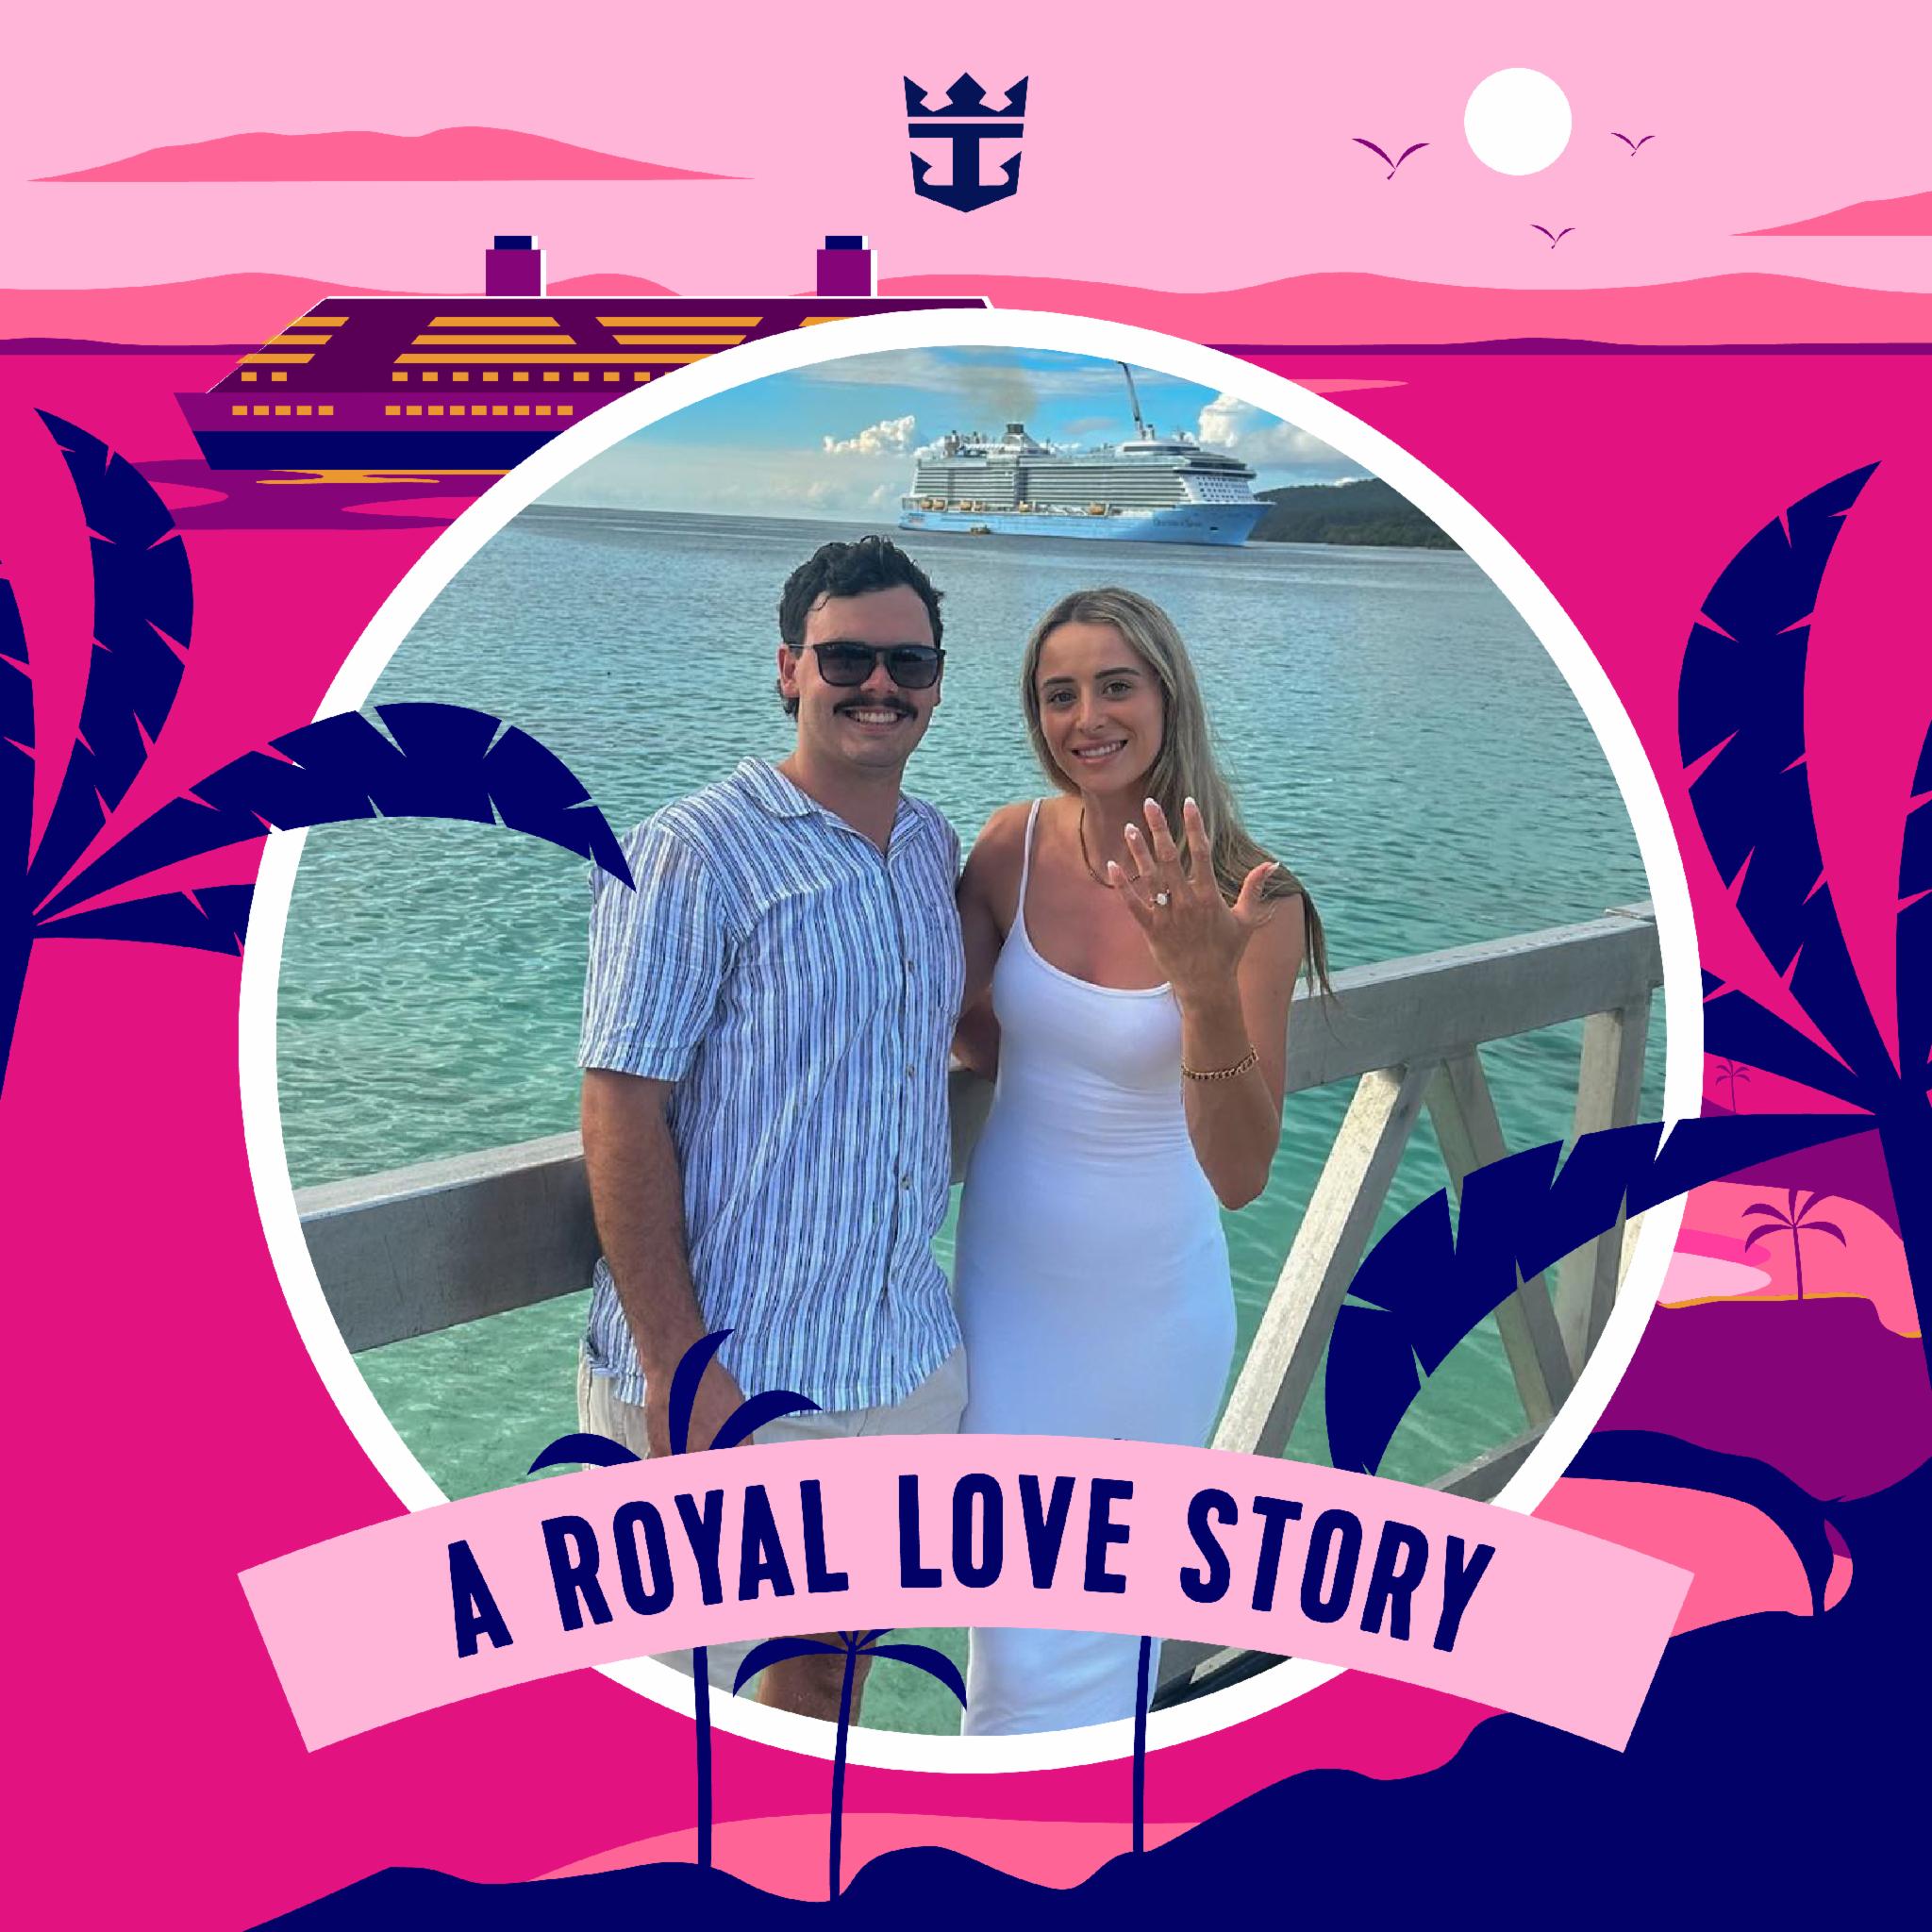 The couple in love on Royal Caribbean